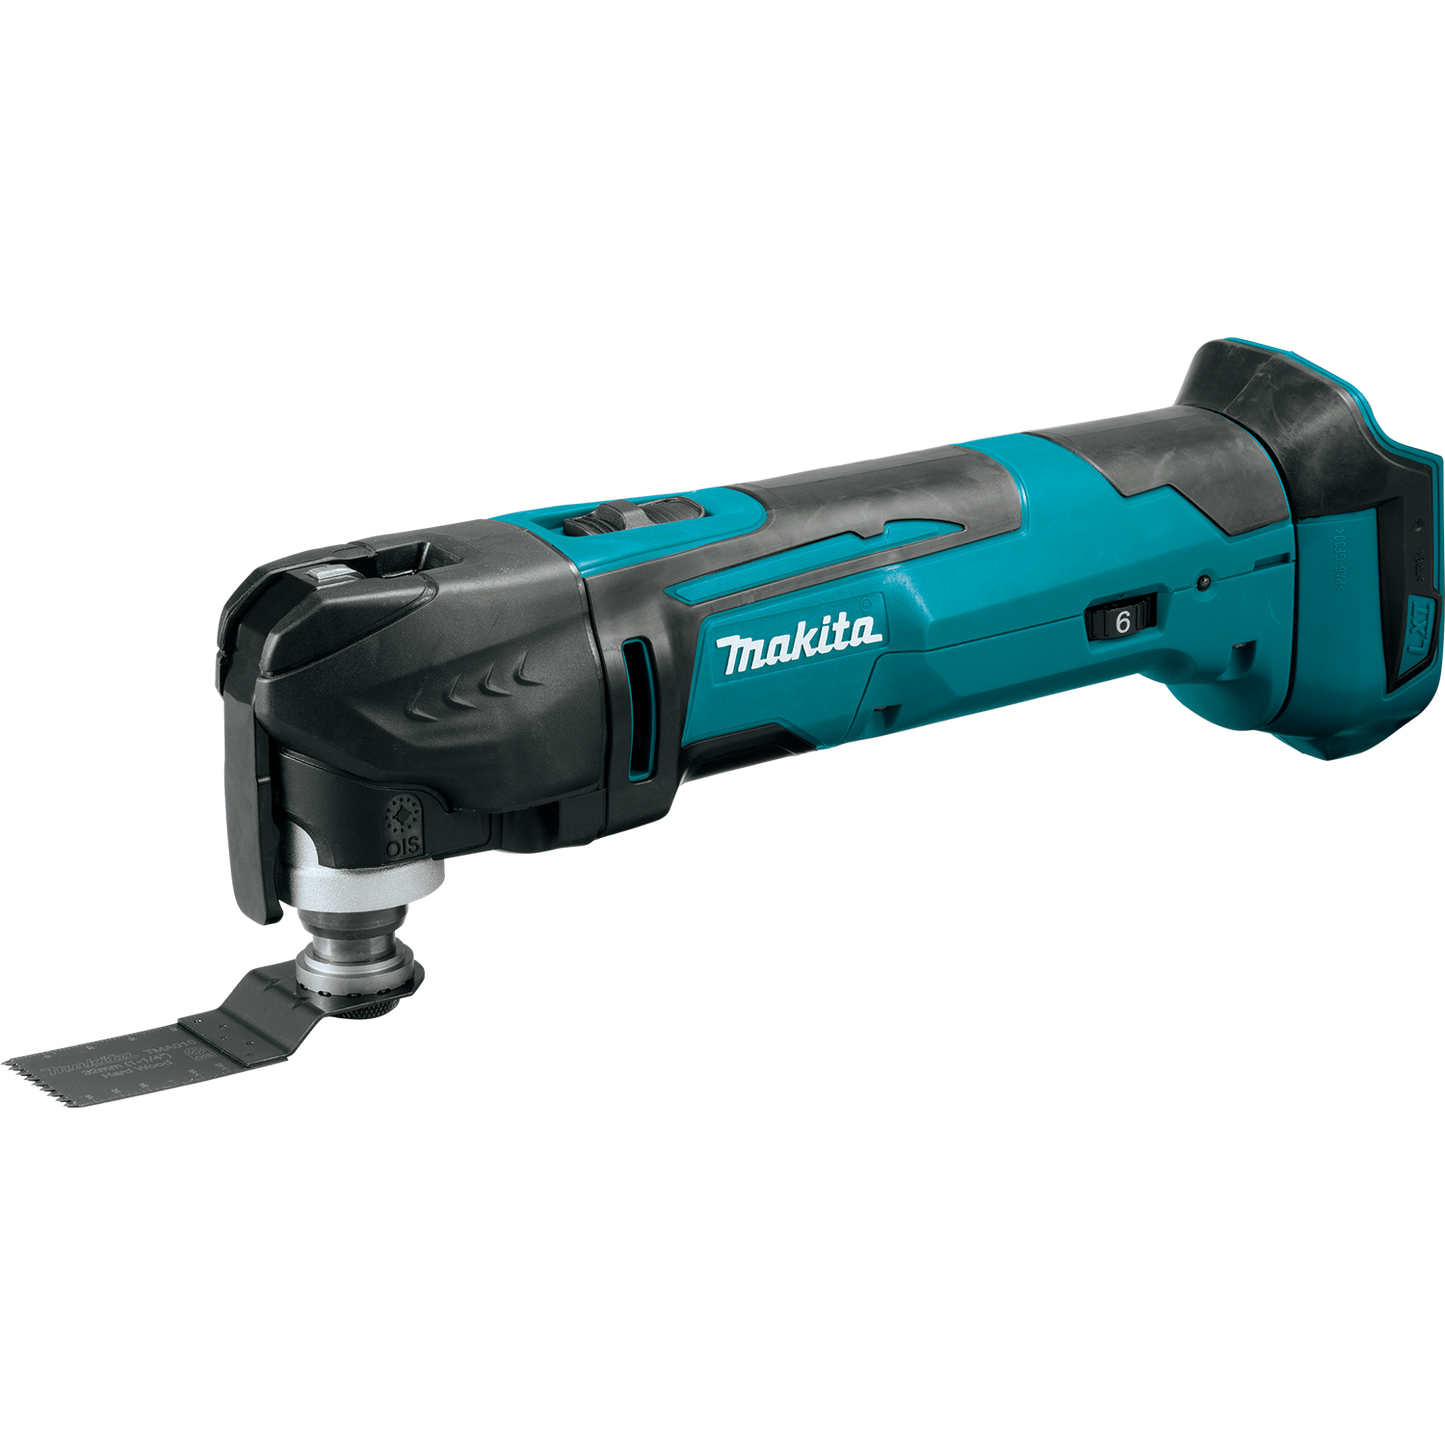 Makita 18 Volt LXT Lithium Ion Cordless Oscillating Multi Tool Factory Serviced (Tool Only)